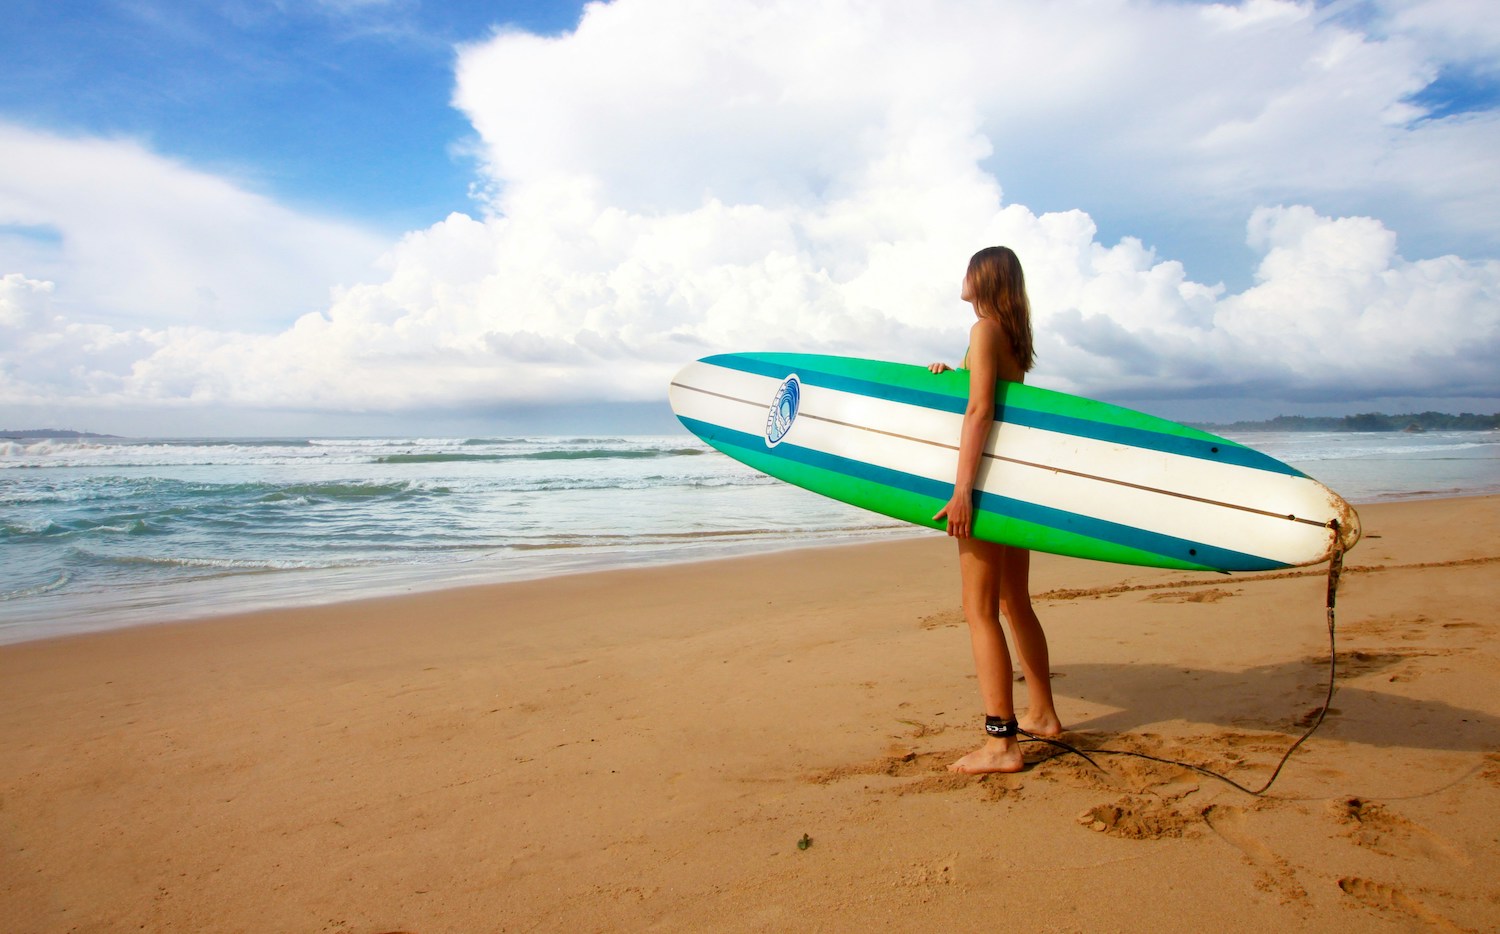 Girl standing on beach with surfboard